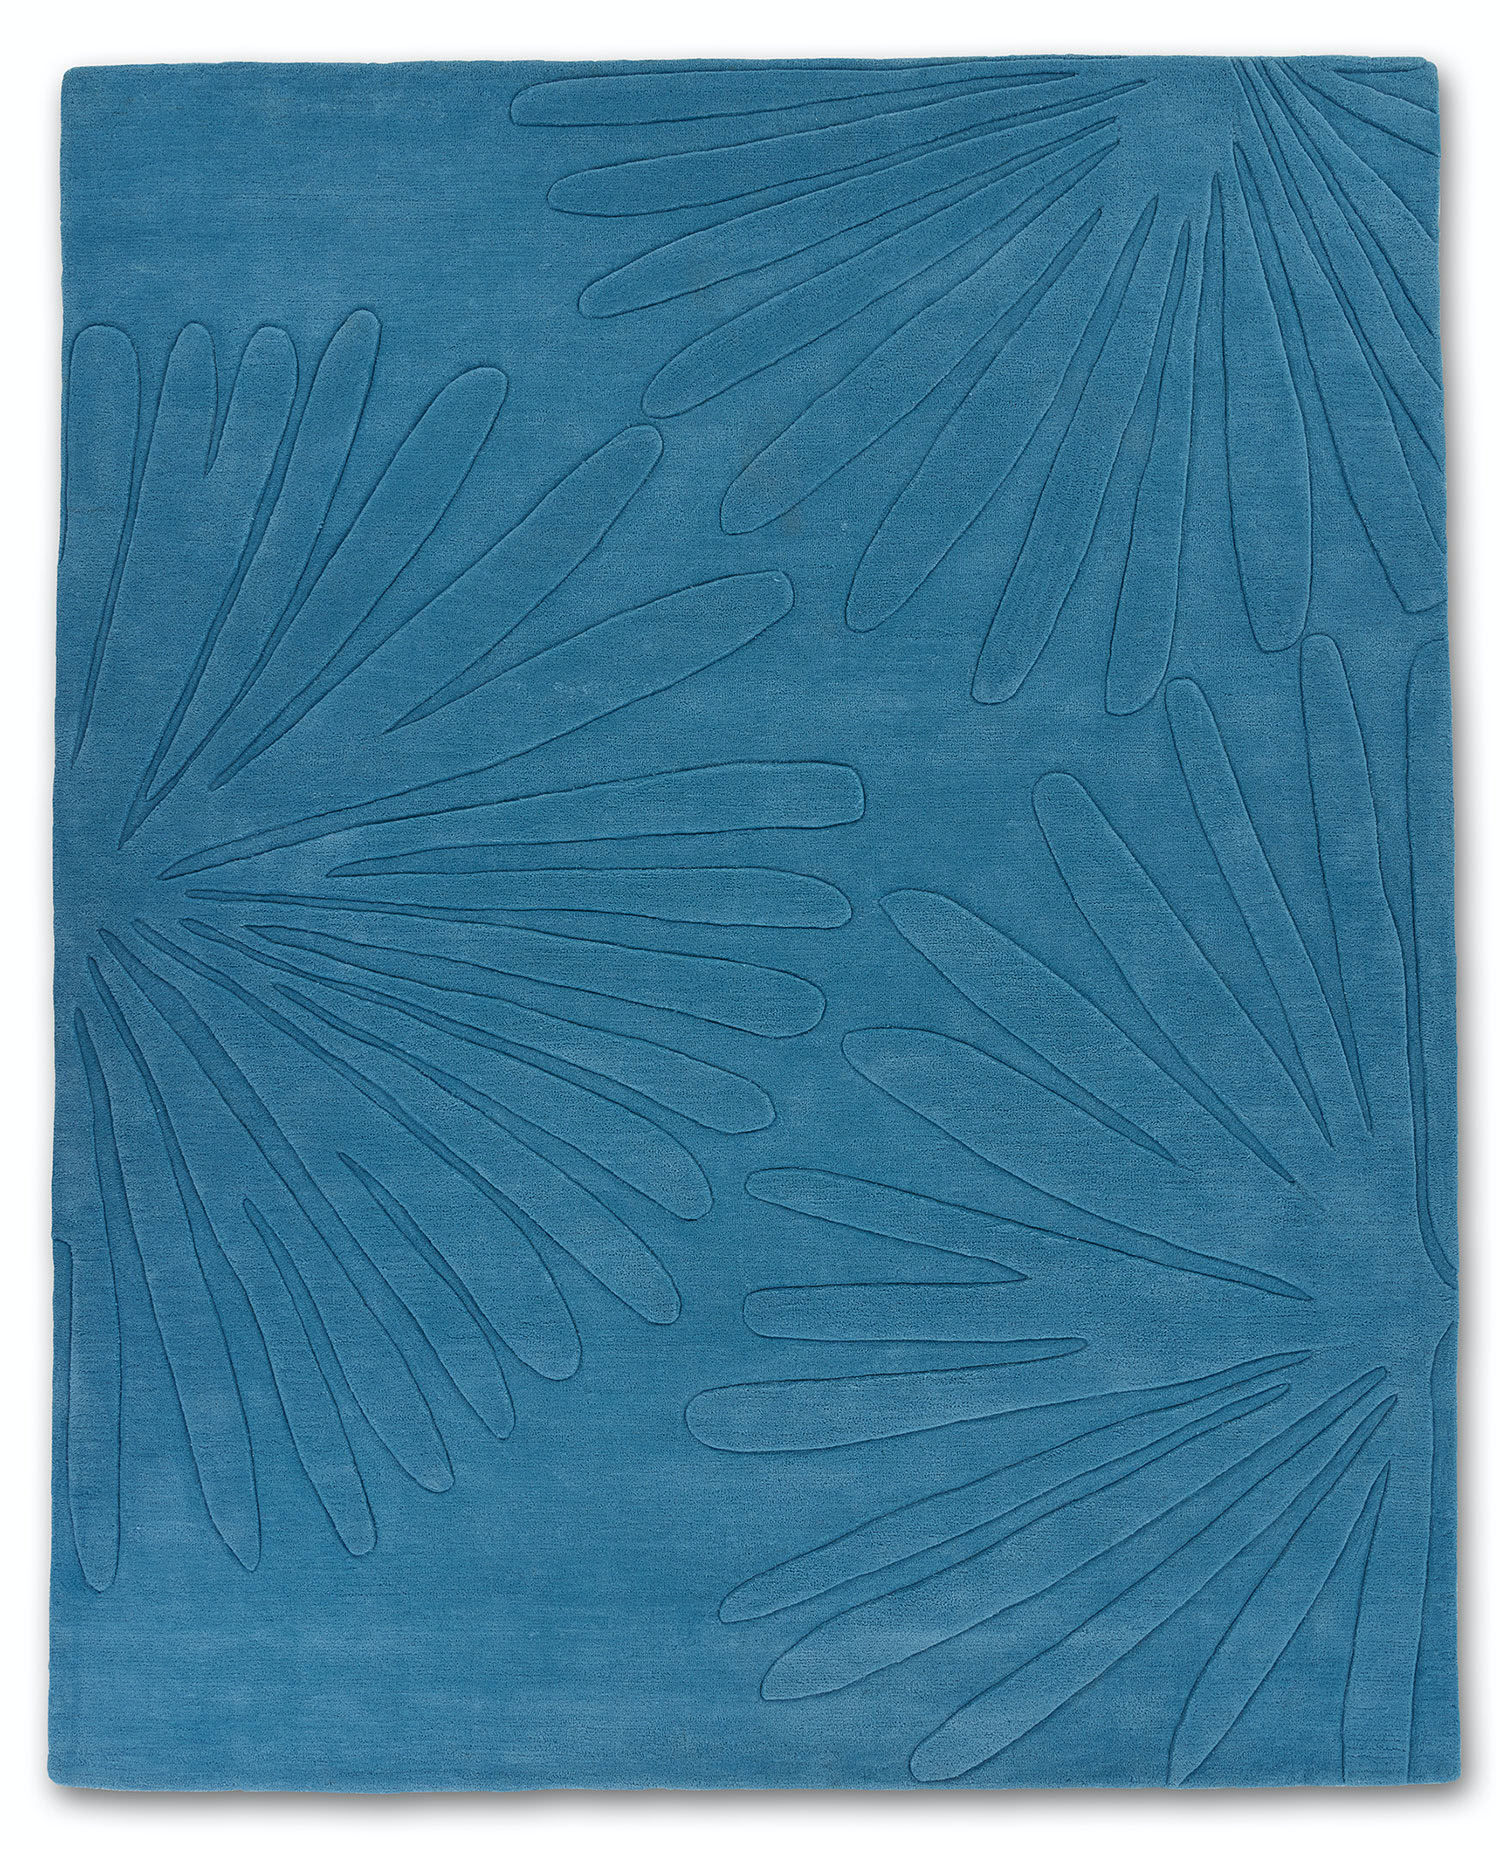 A modern area rug in blue called Daisies Sky